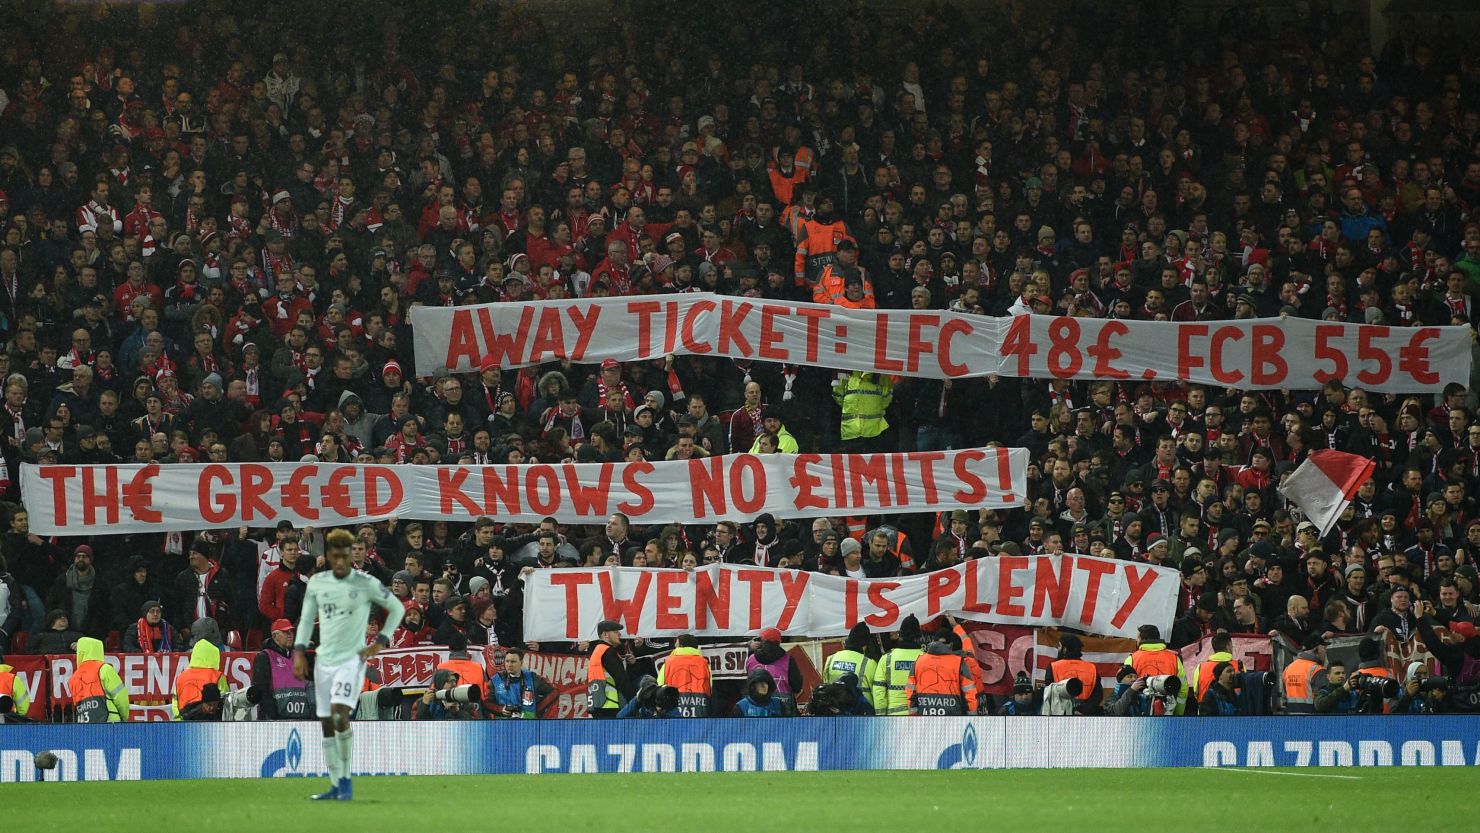 Bayern fans protest against ticket prices during the game at Anfield.